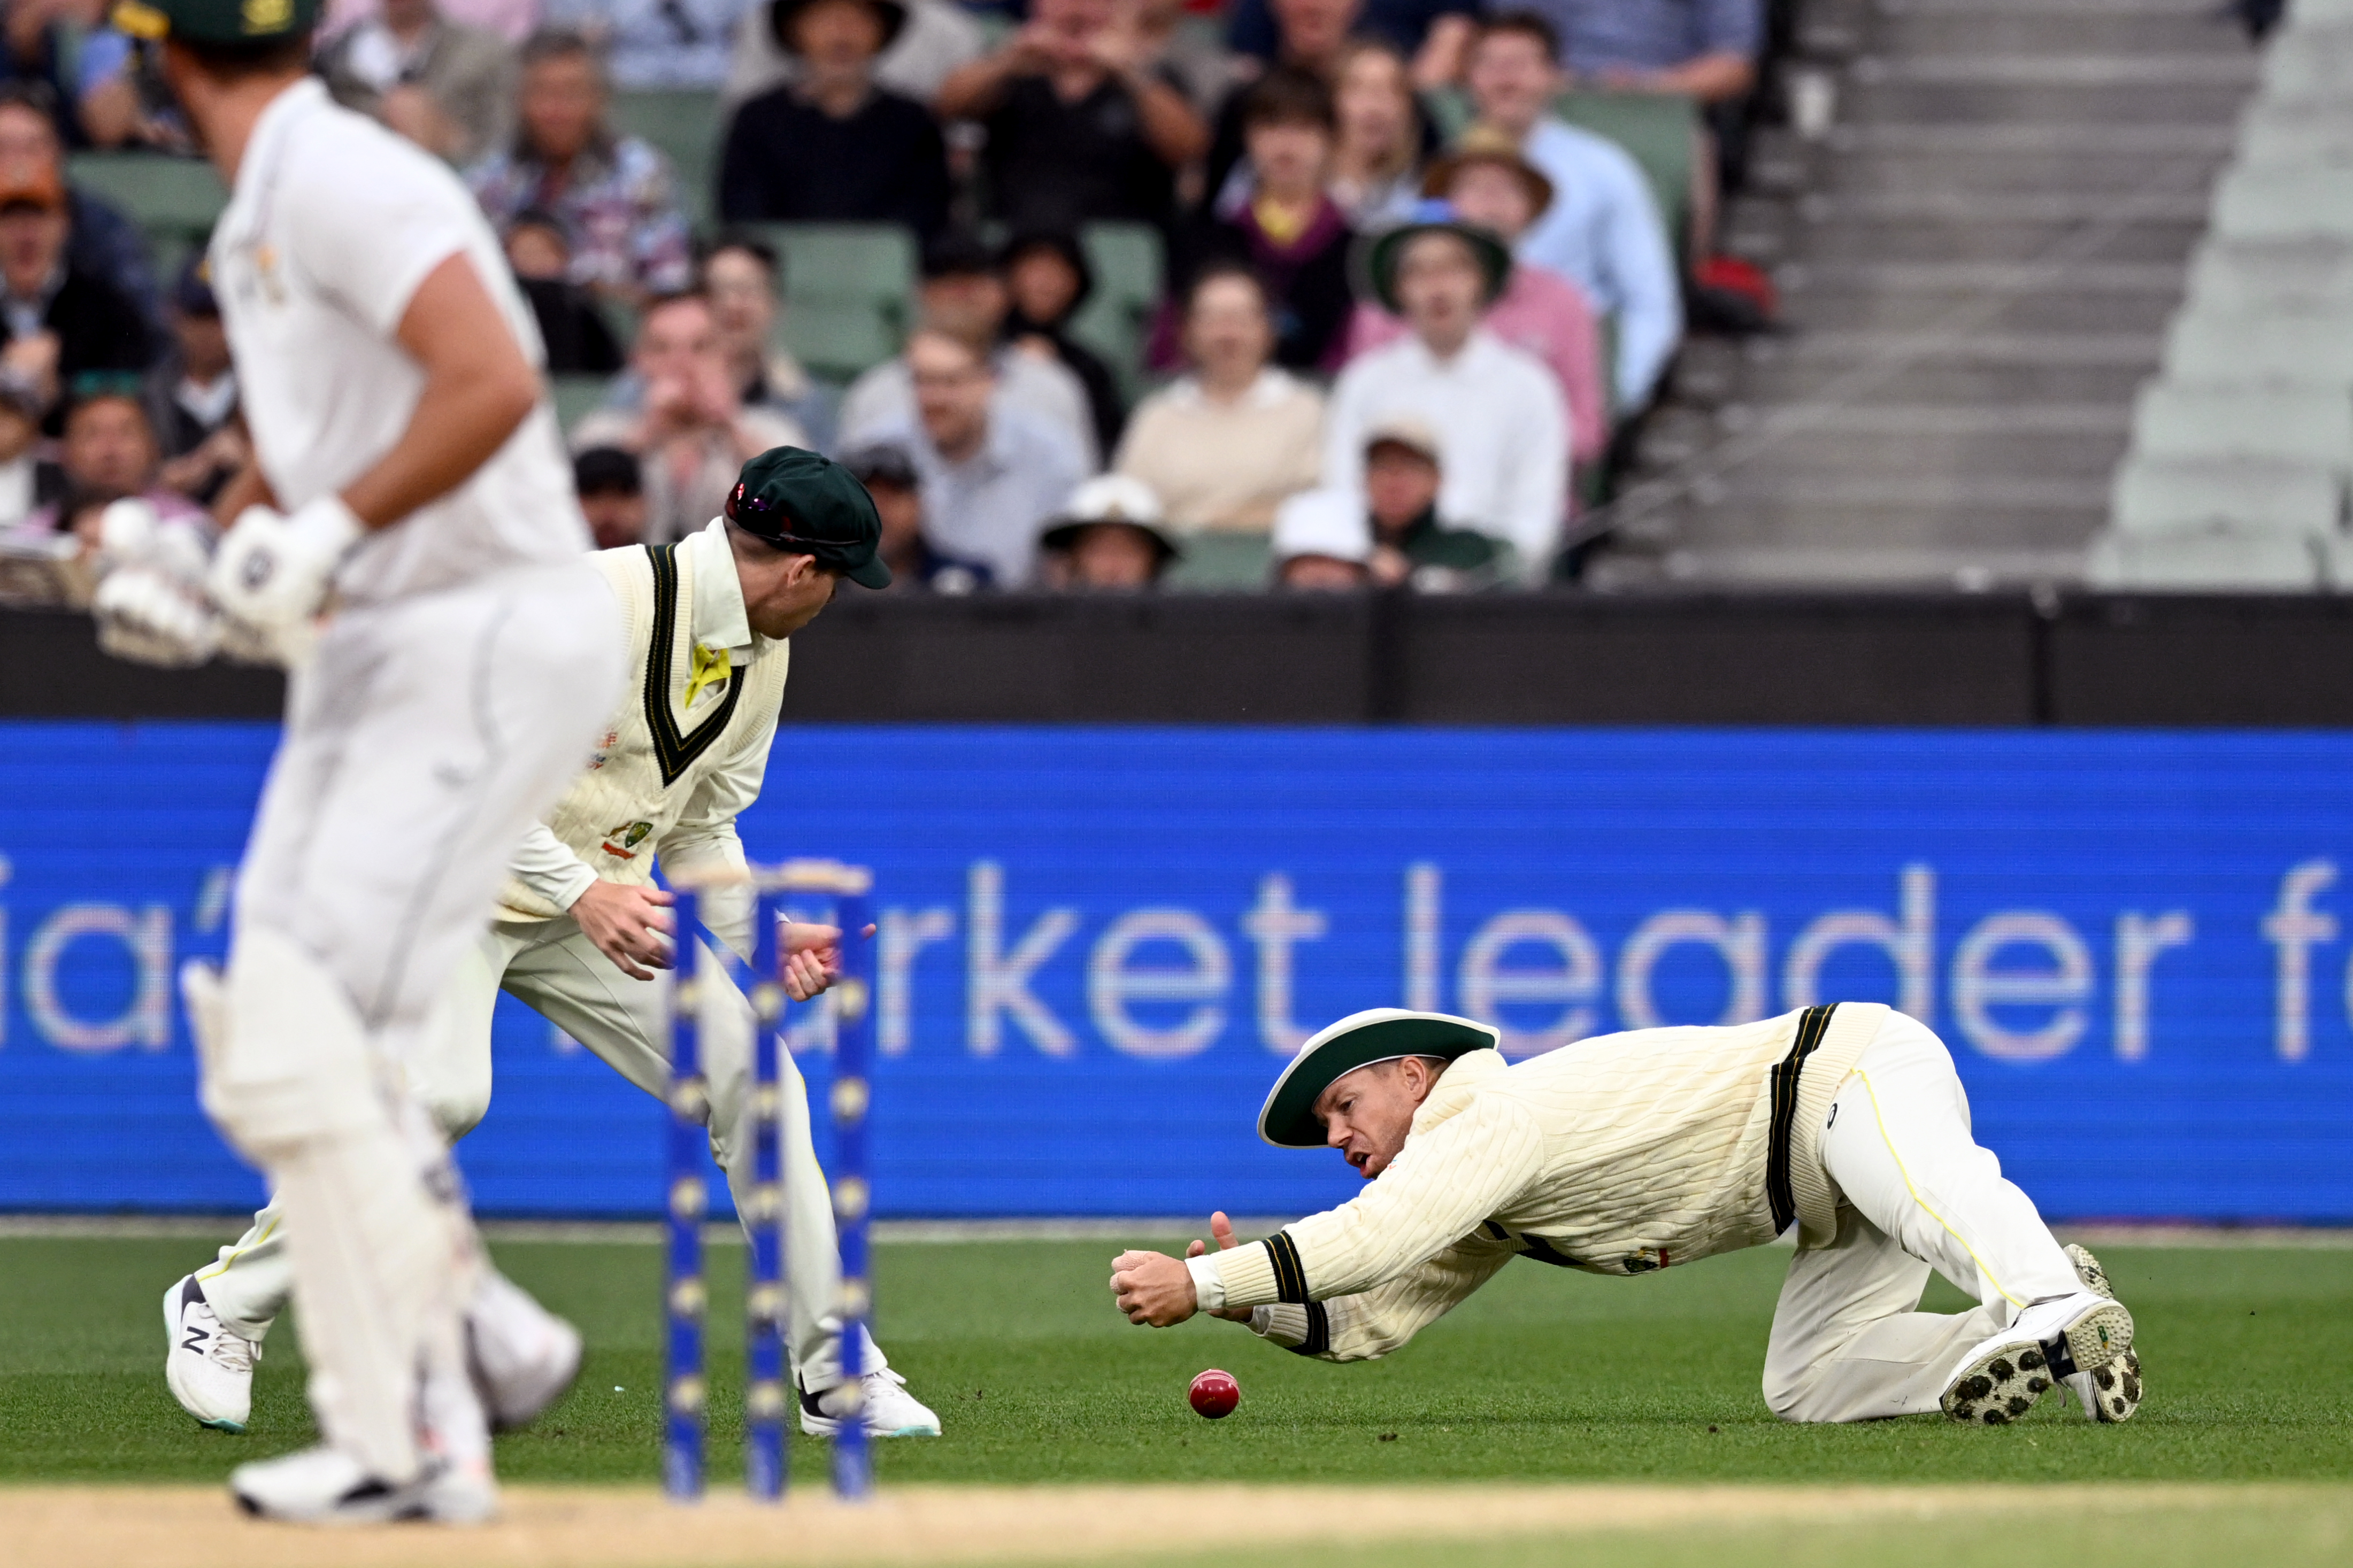 Australia's David Warner (R) drops a catch from South African batsman Theunis de Bruyn (L) on the third day of the second cricket Test match between Australia and South Africa at the MCG in Melbourne on December 28, 2022. (Photo by William WEST / AFP) / -- IMAGE RESTRICTED TO EDITORIAL USE - STRICTLY NO COMMERCIAL USE -- - -- IMAGE RESTRICTED TO EDITORIAL USE - STRICTLY NO COMMERCIAL USE --